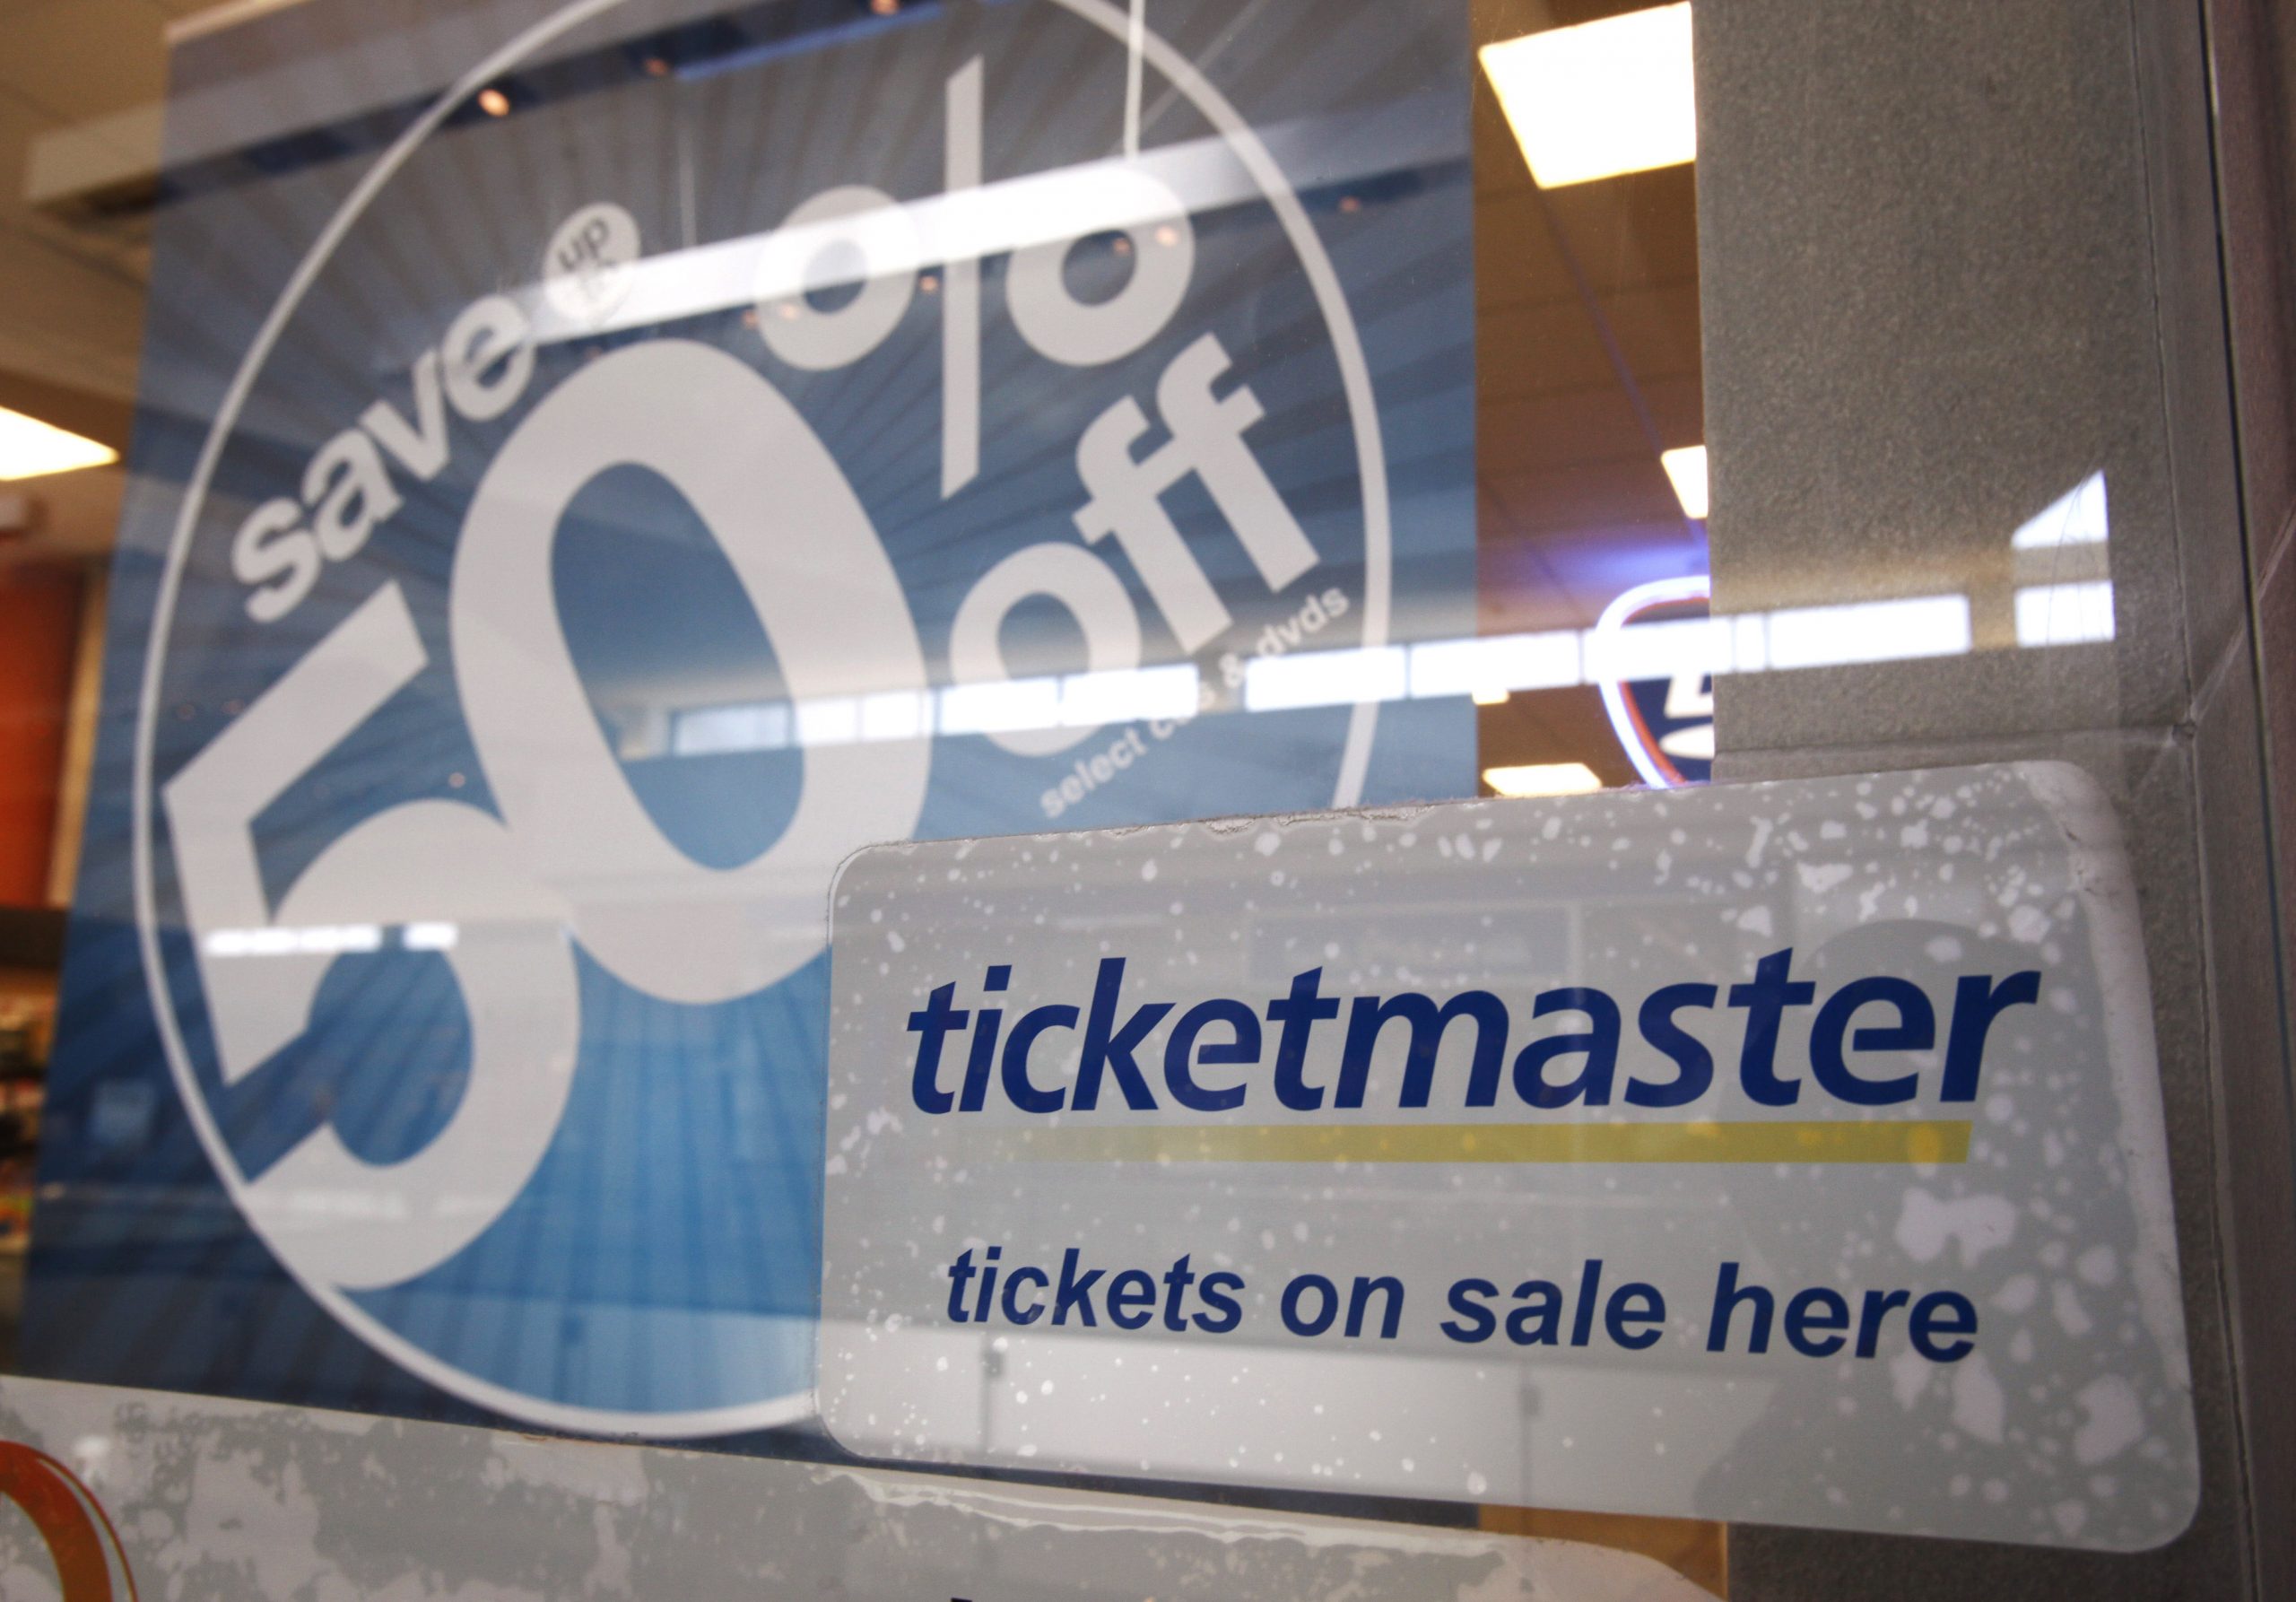 Ticketmaster agrees to pay $ 10 million in fines to solve fraud and piracy charges